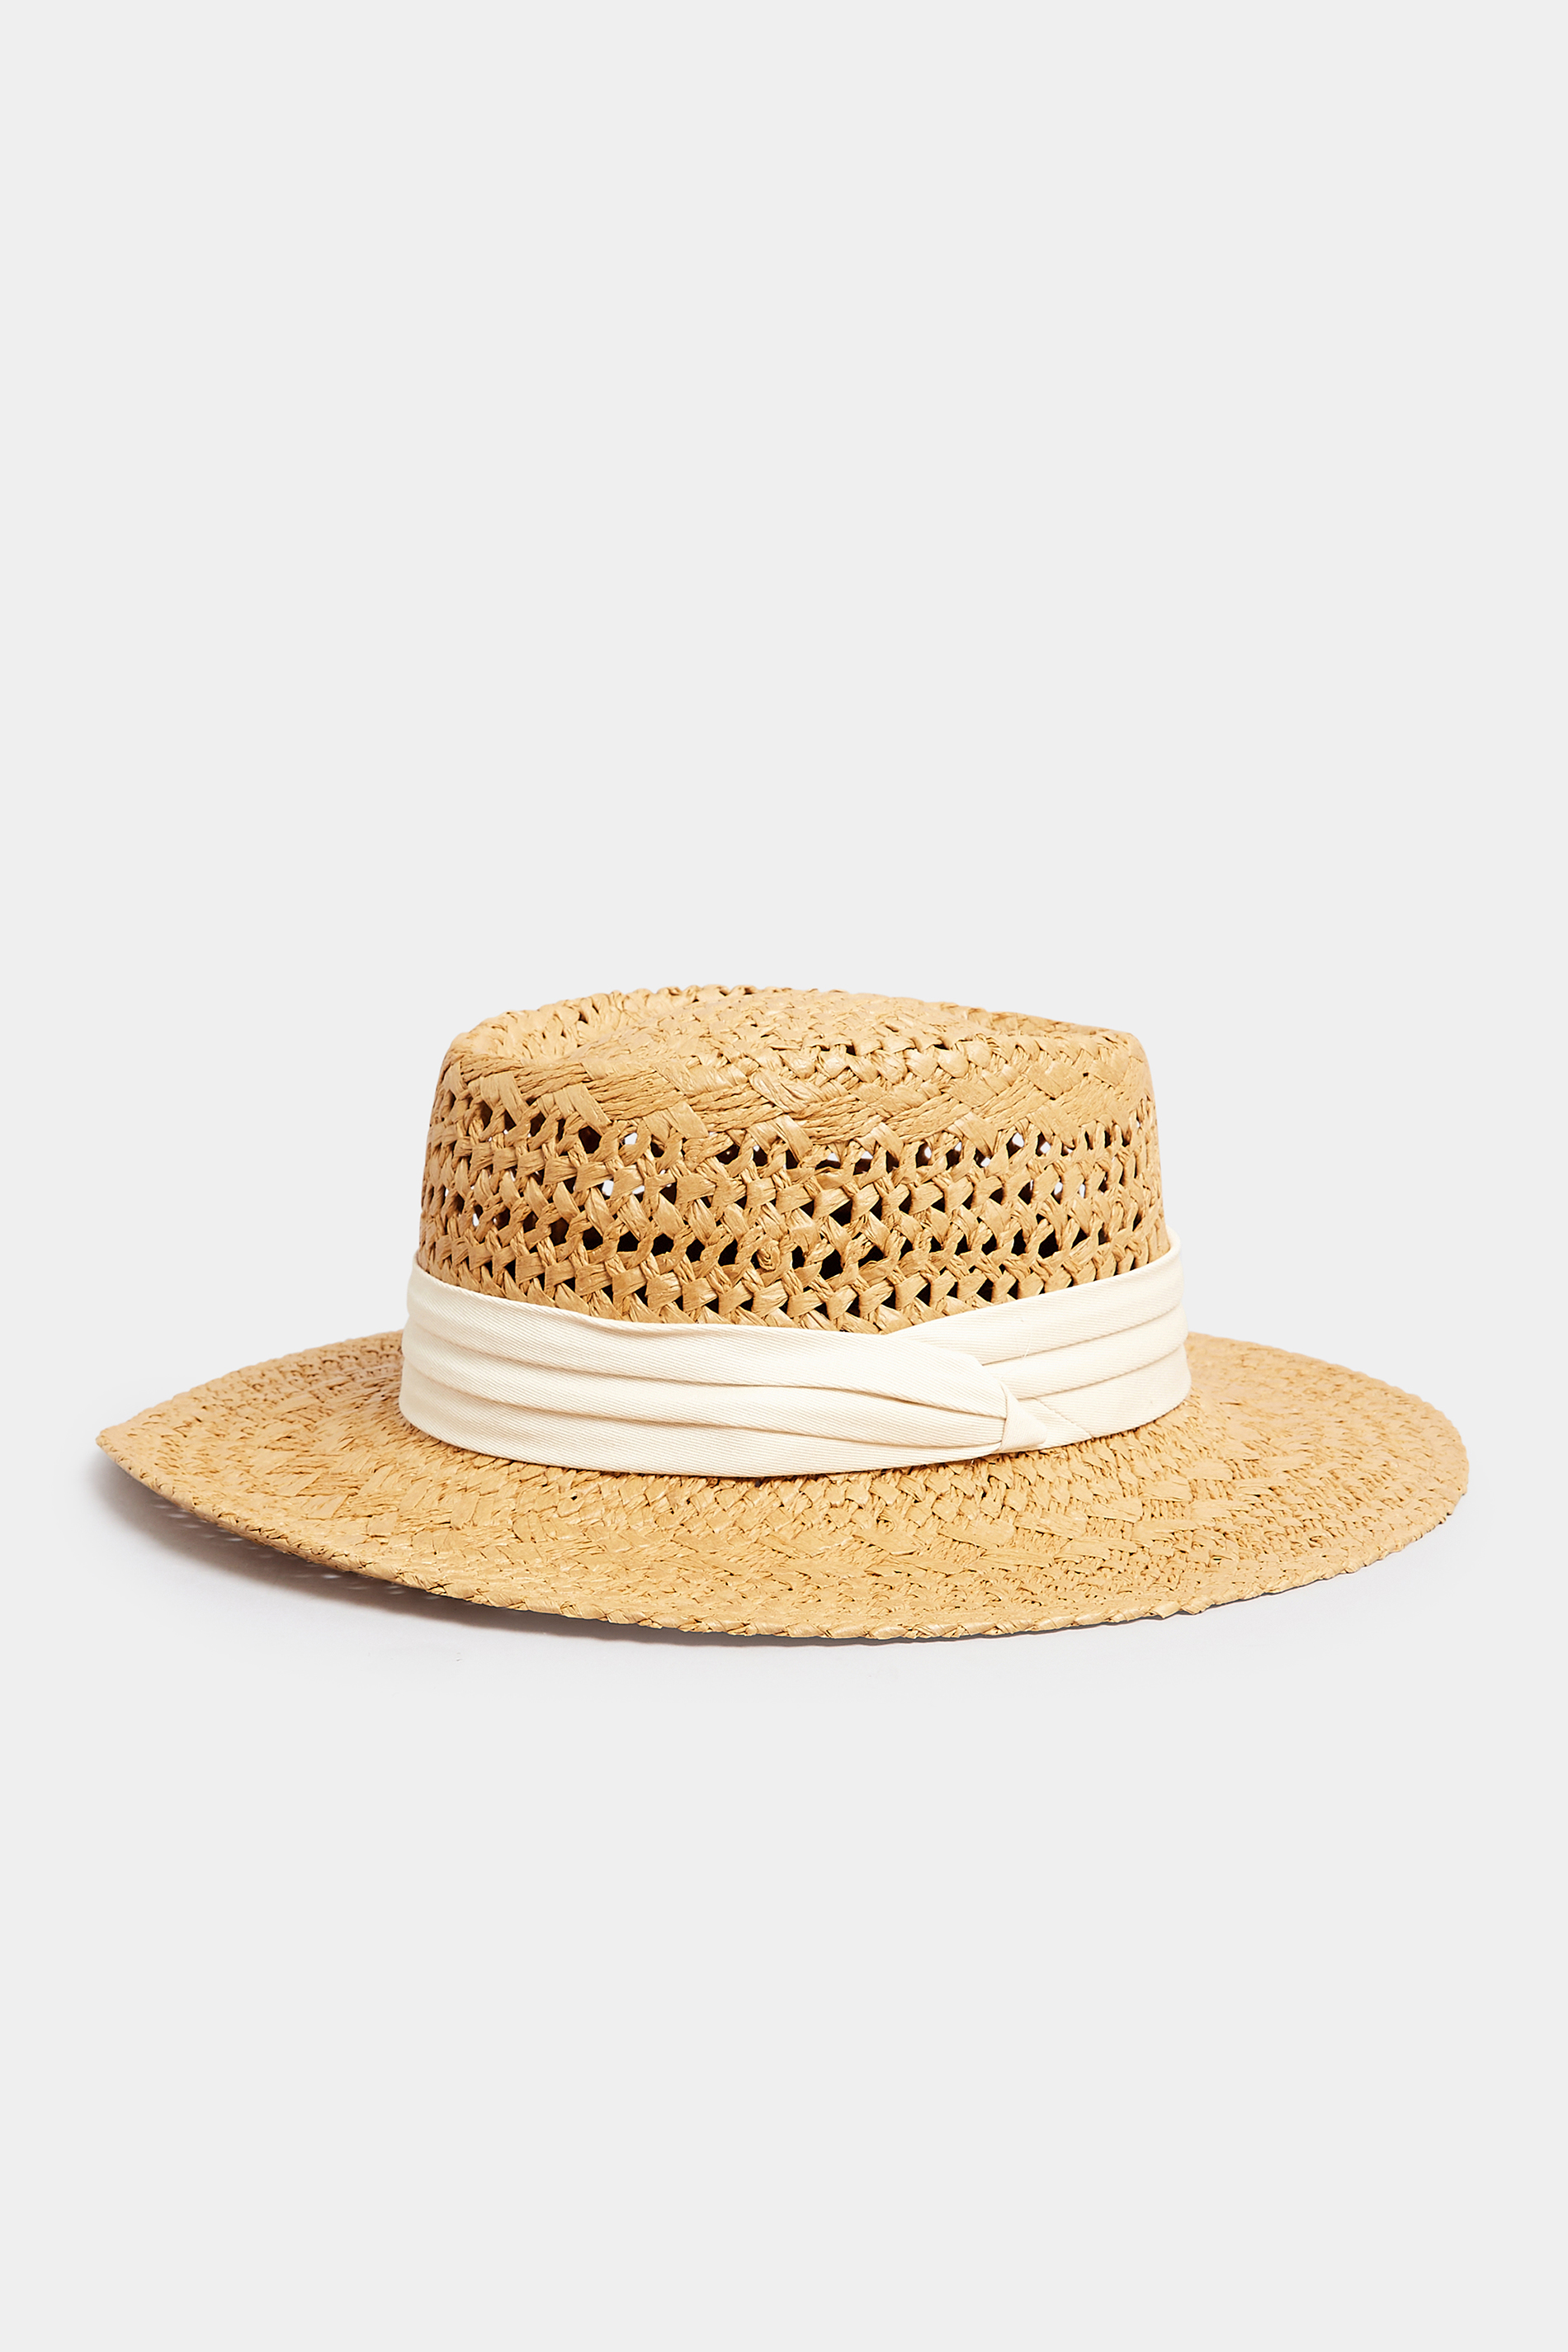 Beige Brown & White Straw Boater Hat | Yours Clothing 2